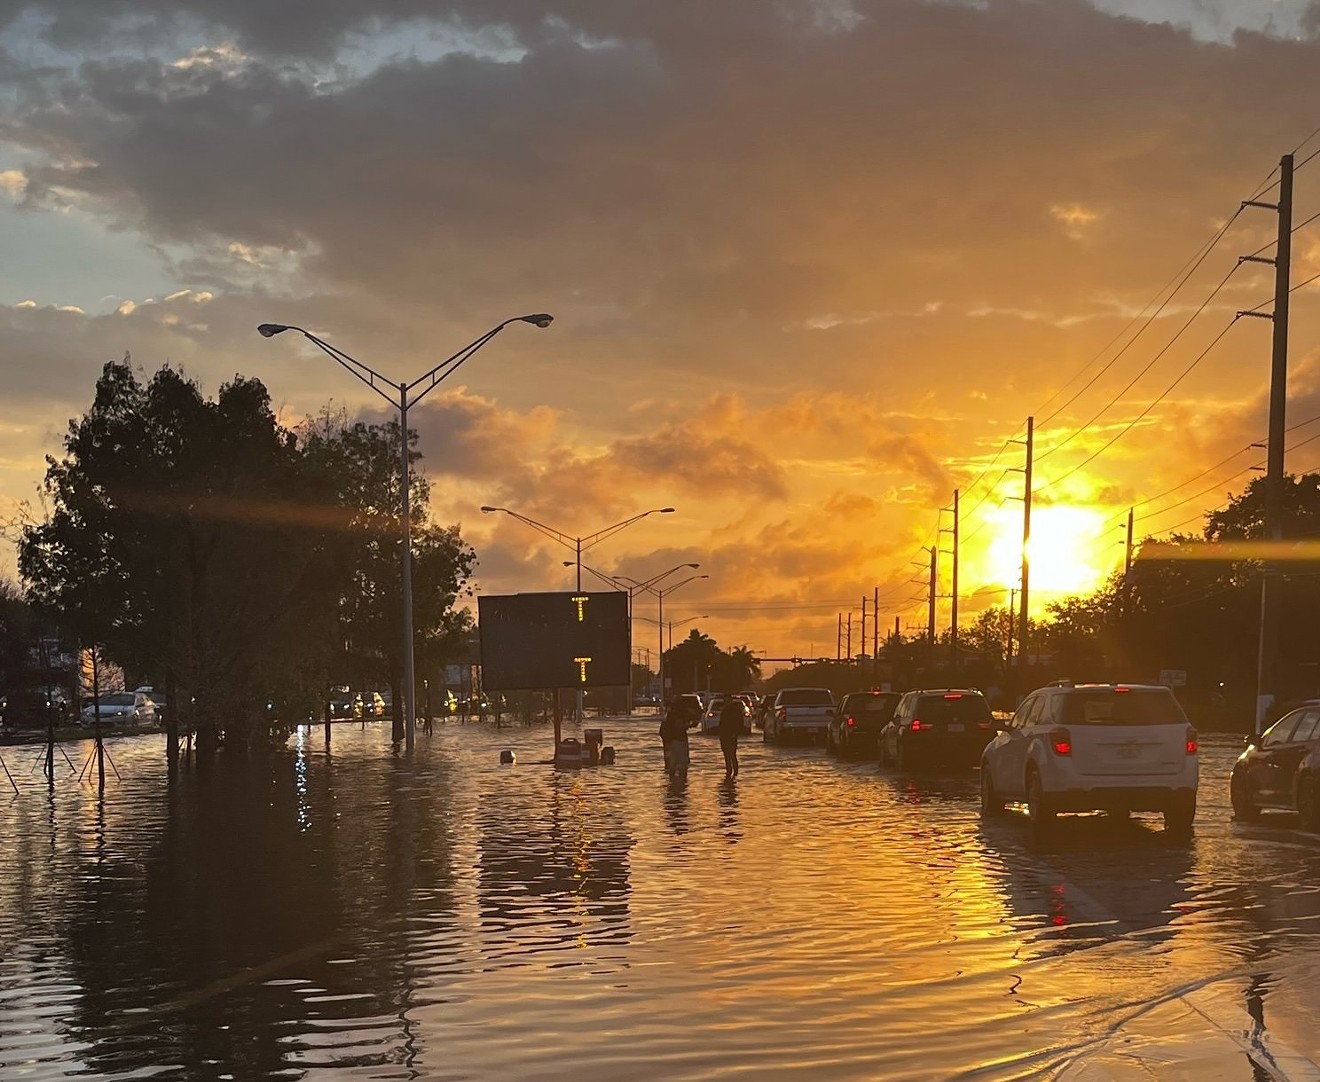 The sun rises over waterlogged Broward County after a night of historic rain.